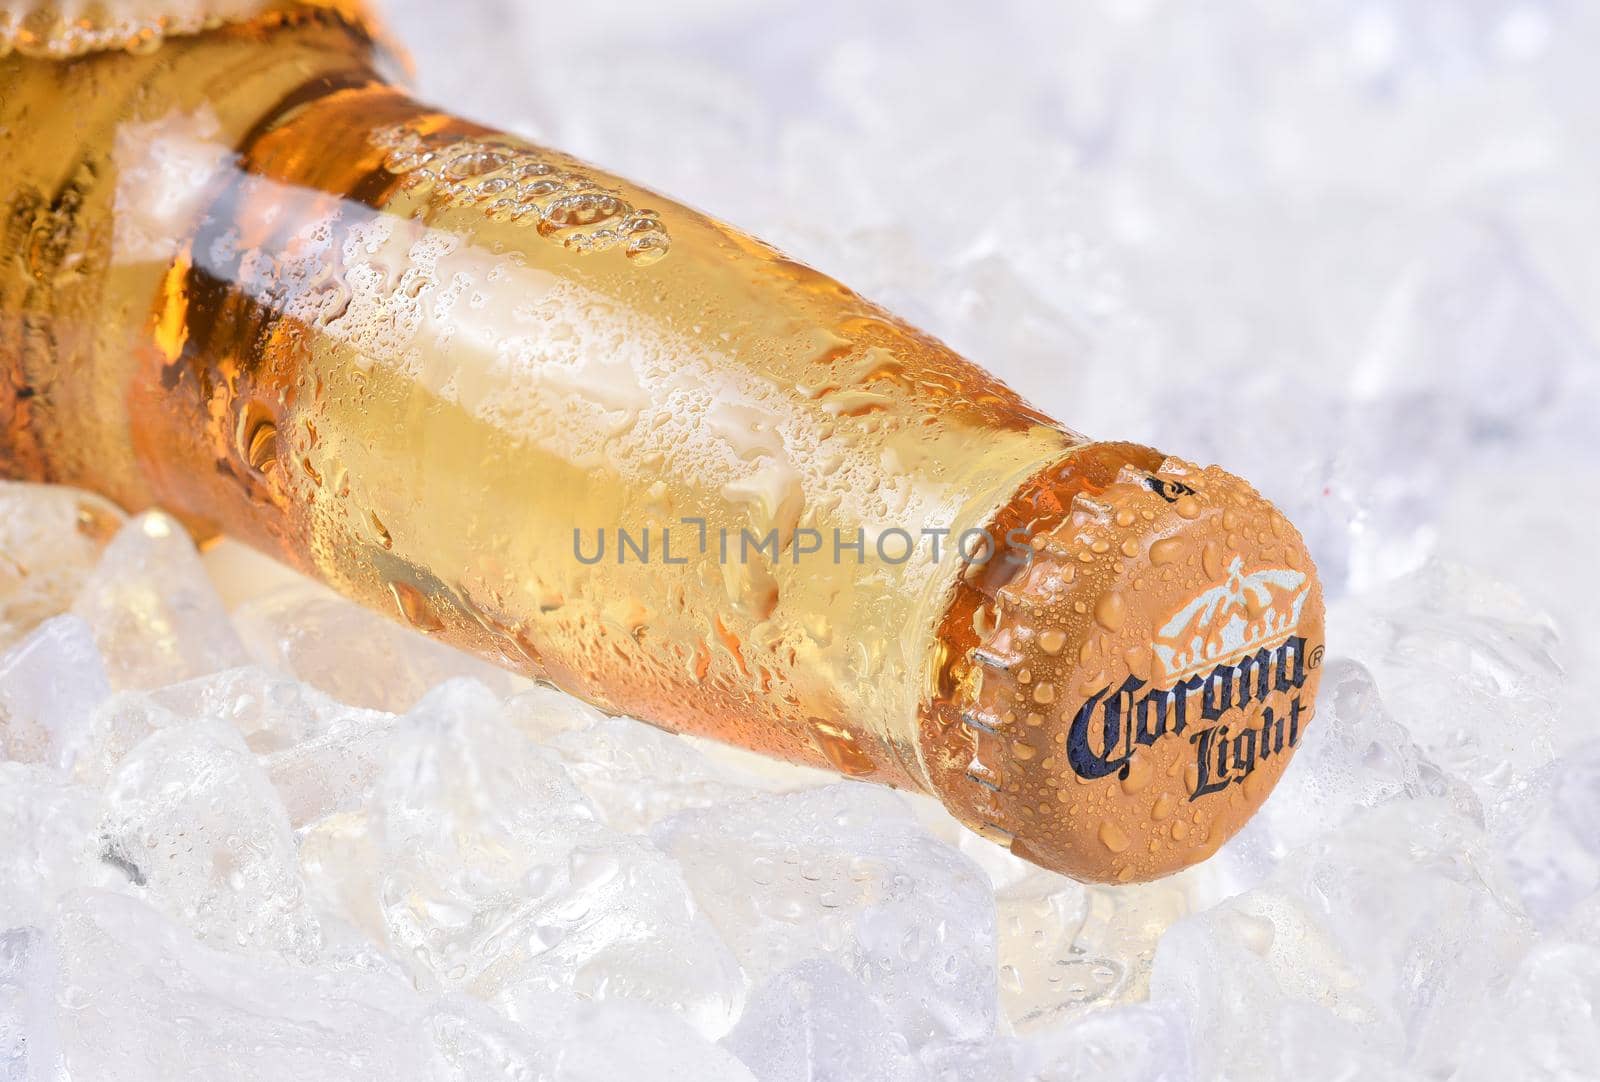 IRVINE, CALIFORNIA - DECEMBER 15, 2017: A bottle of Corona Light Beer on ice. Corona is the most popular imported beer in the USA.